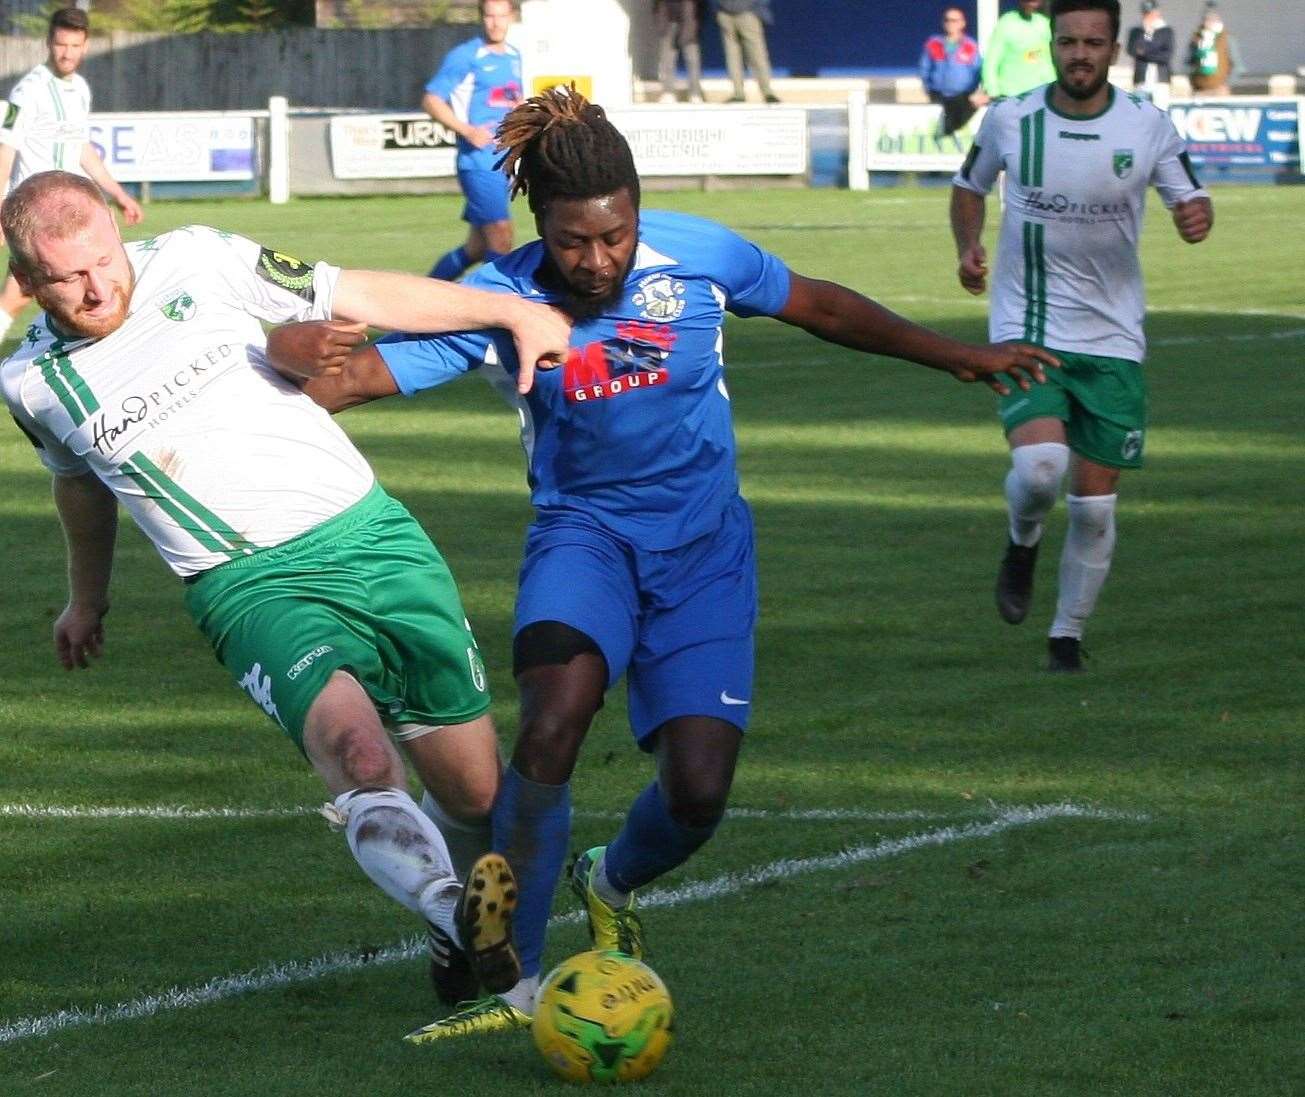 Former Herne Bay midfielder Bola Dawodu, pictured against Guernsey in 2019, will face his former club with Bowers & Pitsea this Saturday